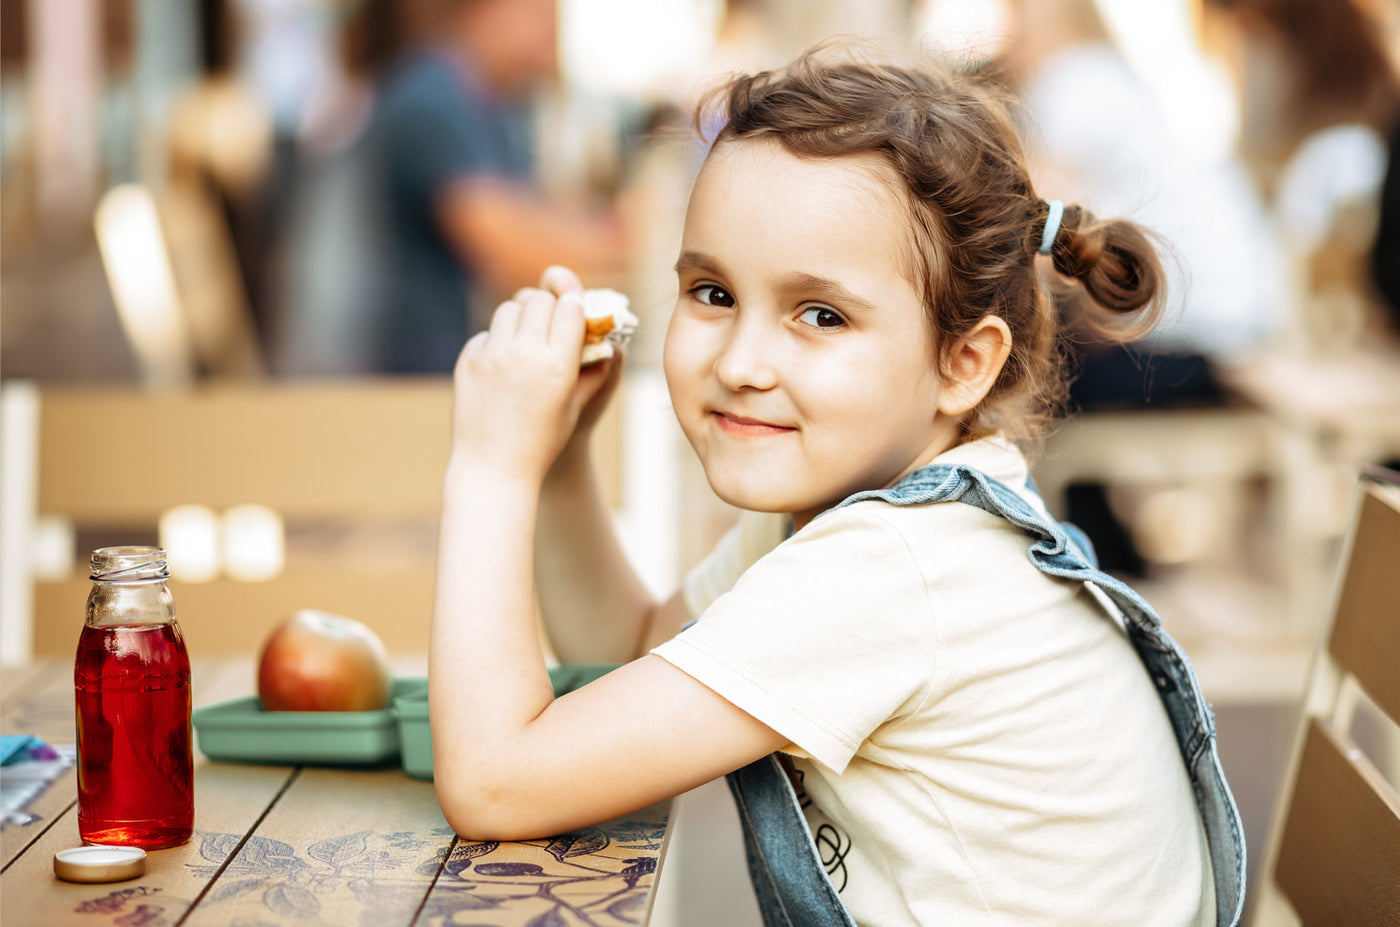 Bridging Nutritional Gaps Across Ages in The US